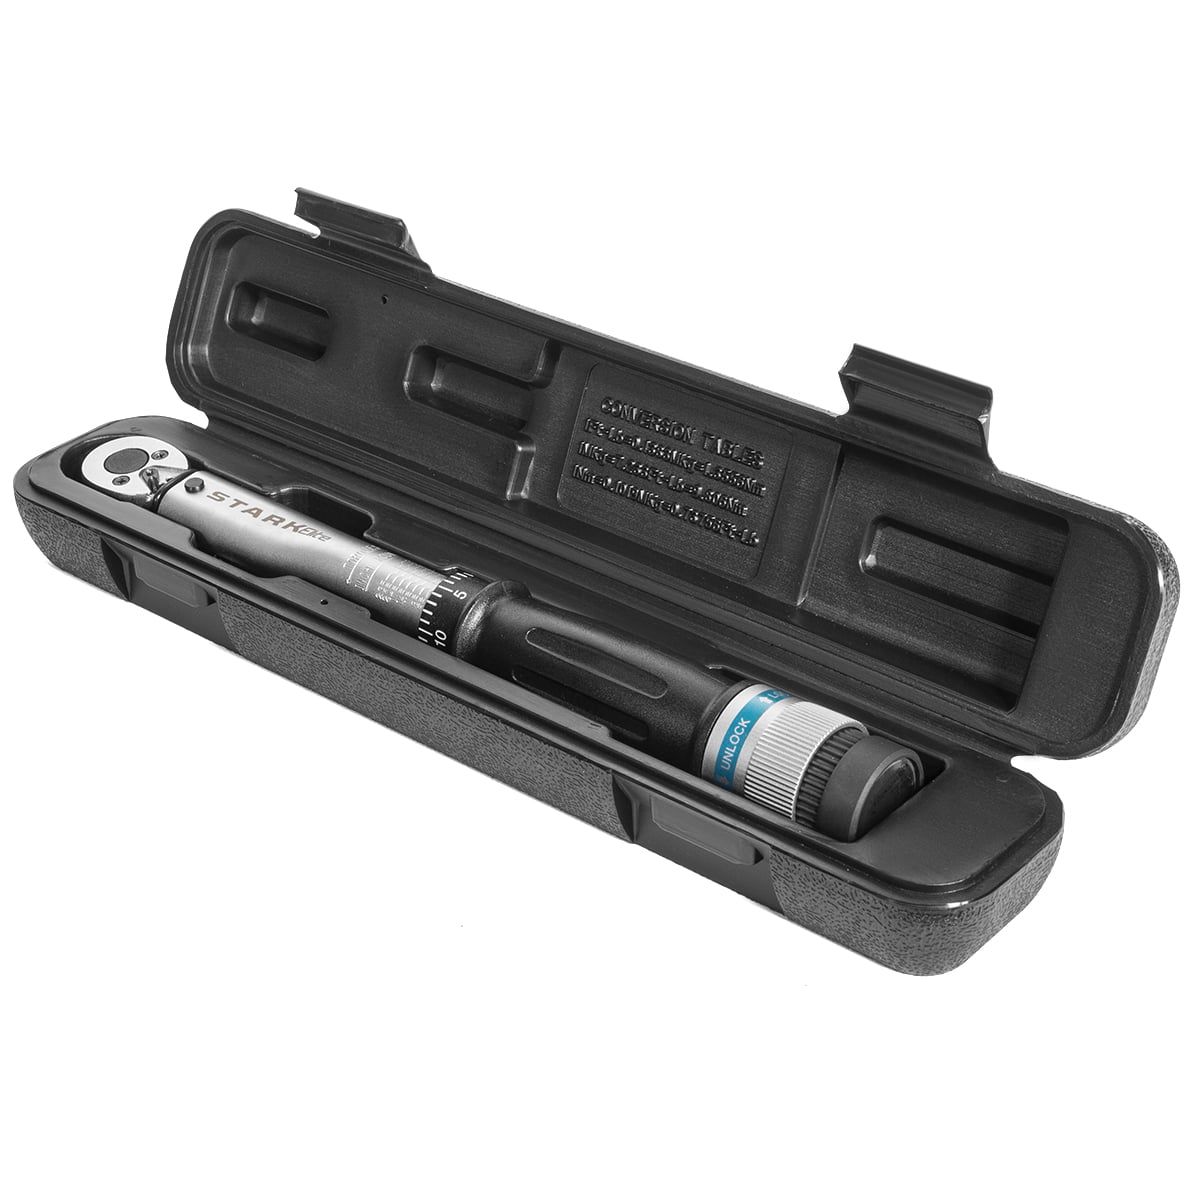 Adjustable Torque Wrench 40-250 In/Lb with Carrying Case Professional 3/8" Dr